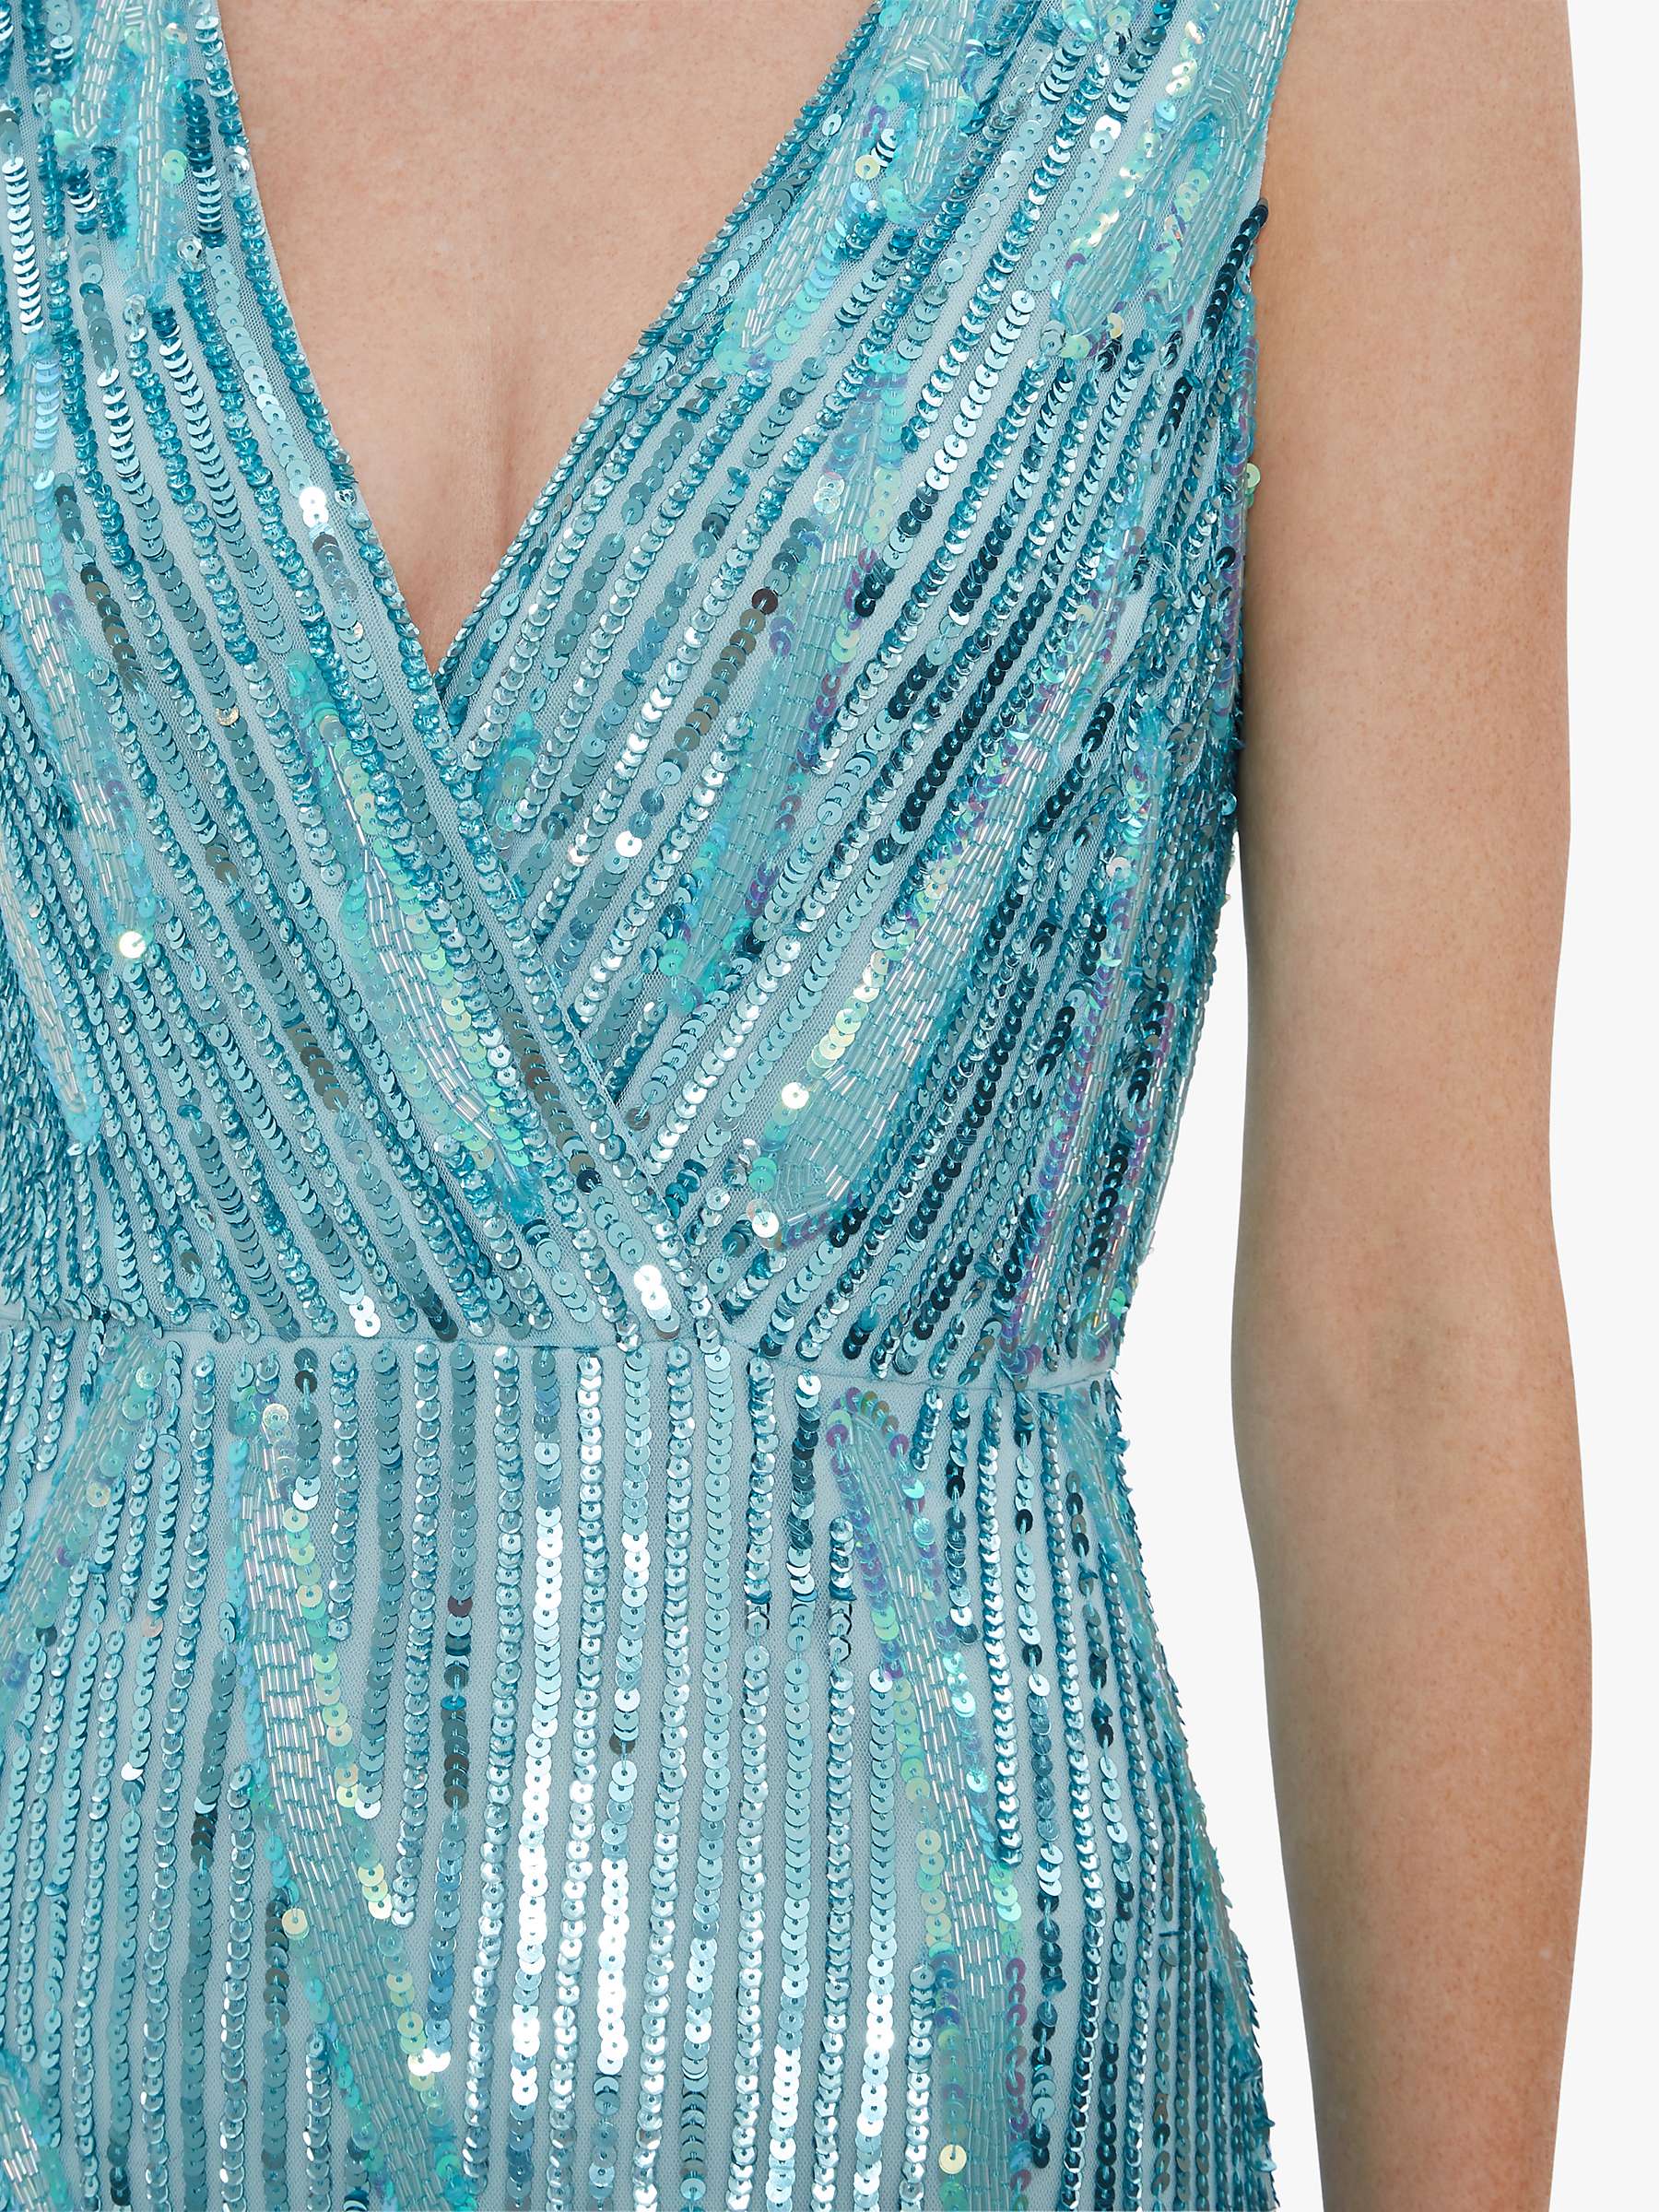 Buy Gina Bacconi Nixie Sequin Maxi Dress, Turquoise Online at johnlewis.com